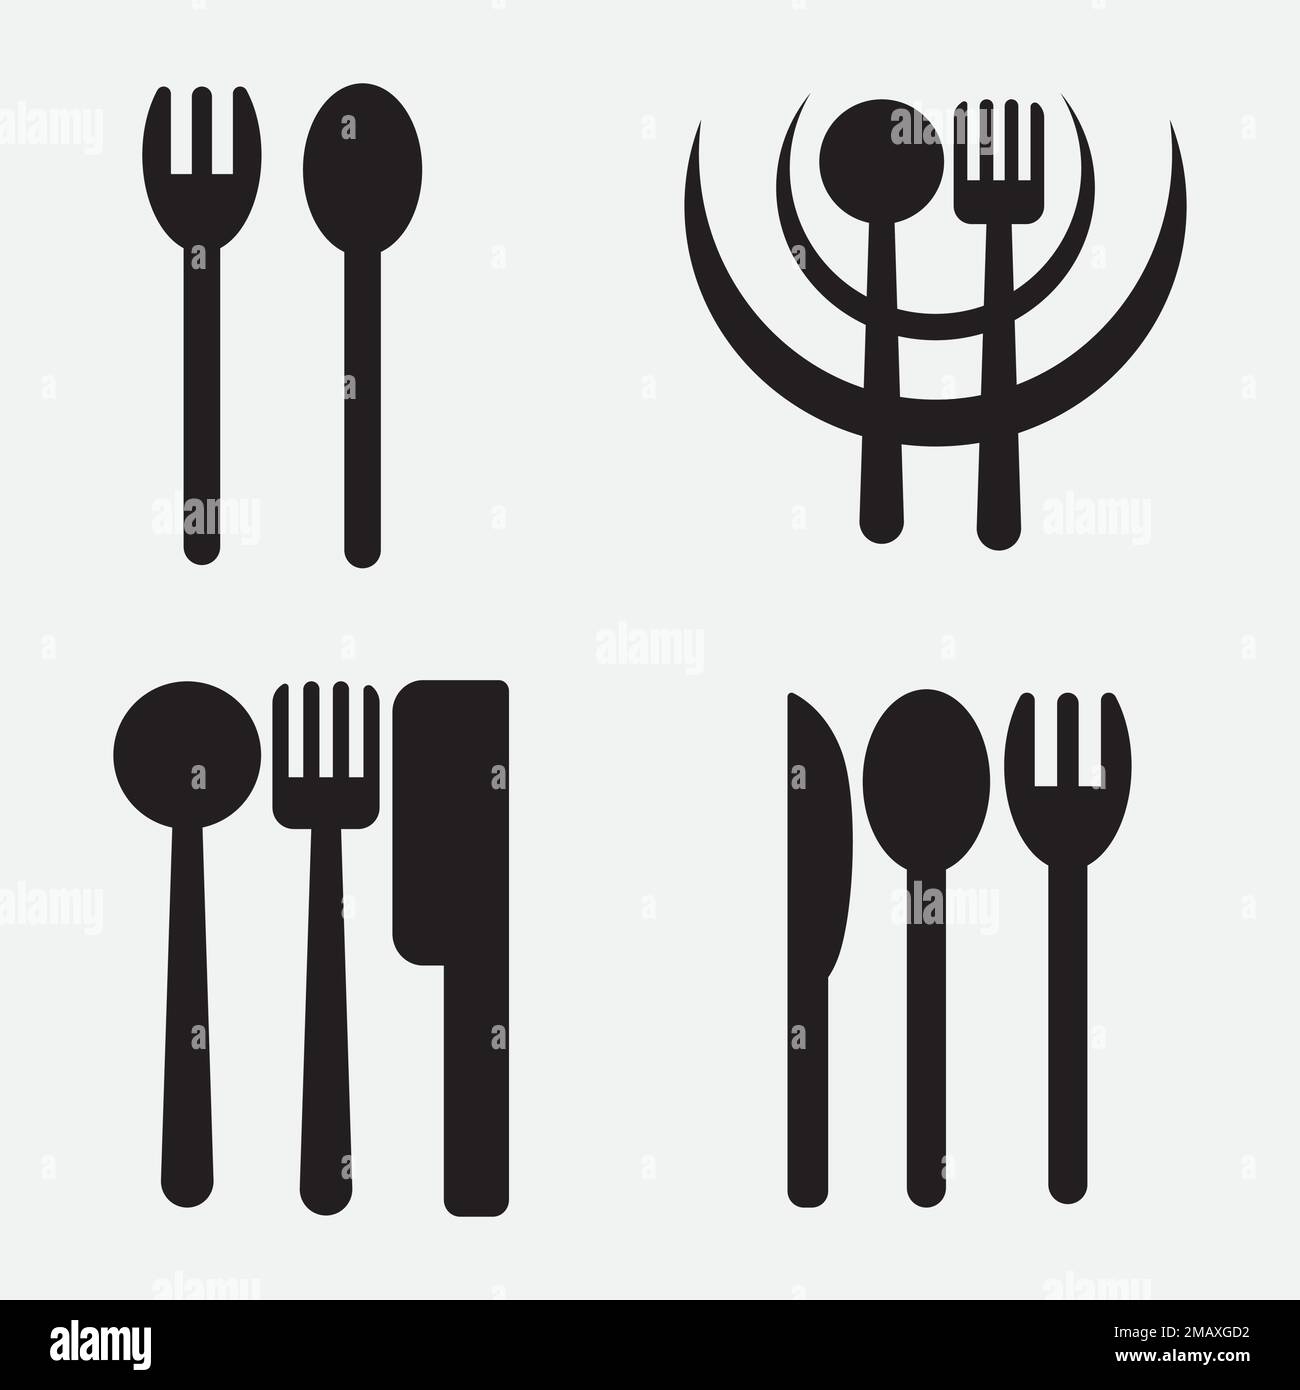 spoon and fork logo vectortemplate Stock Vector